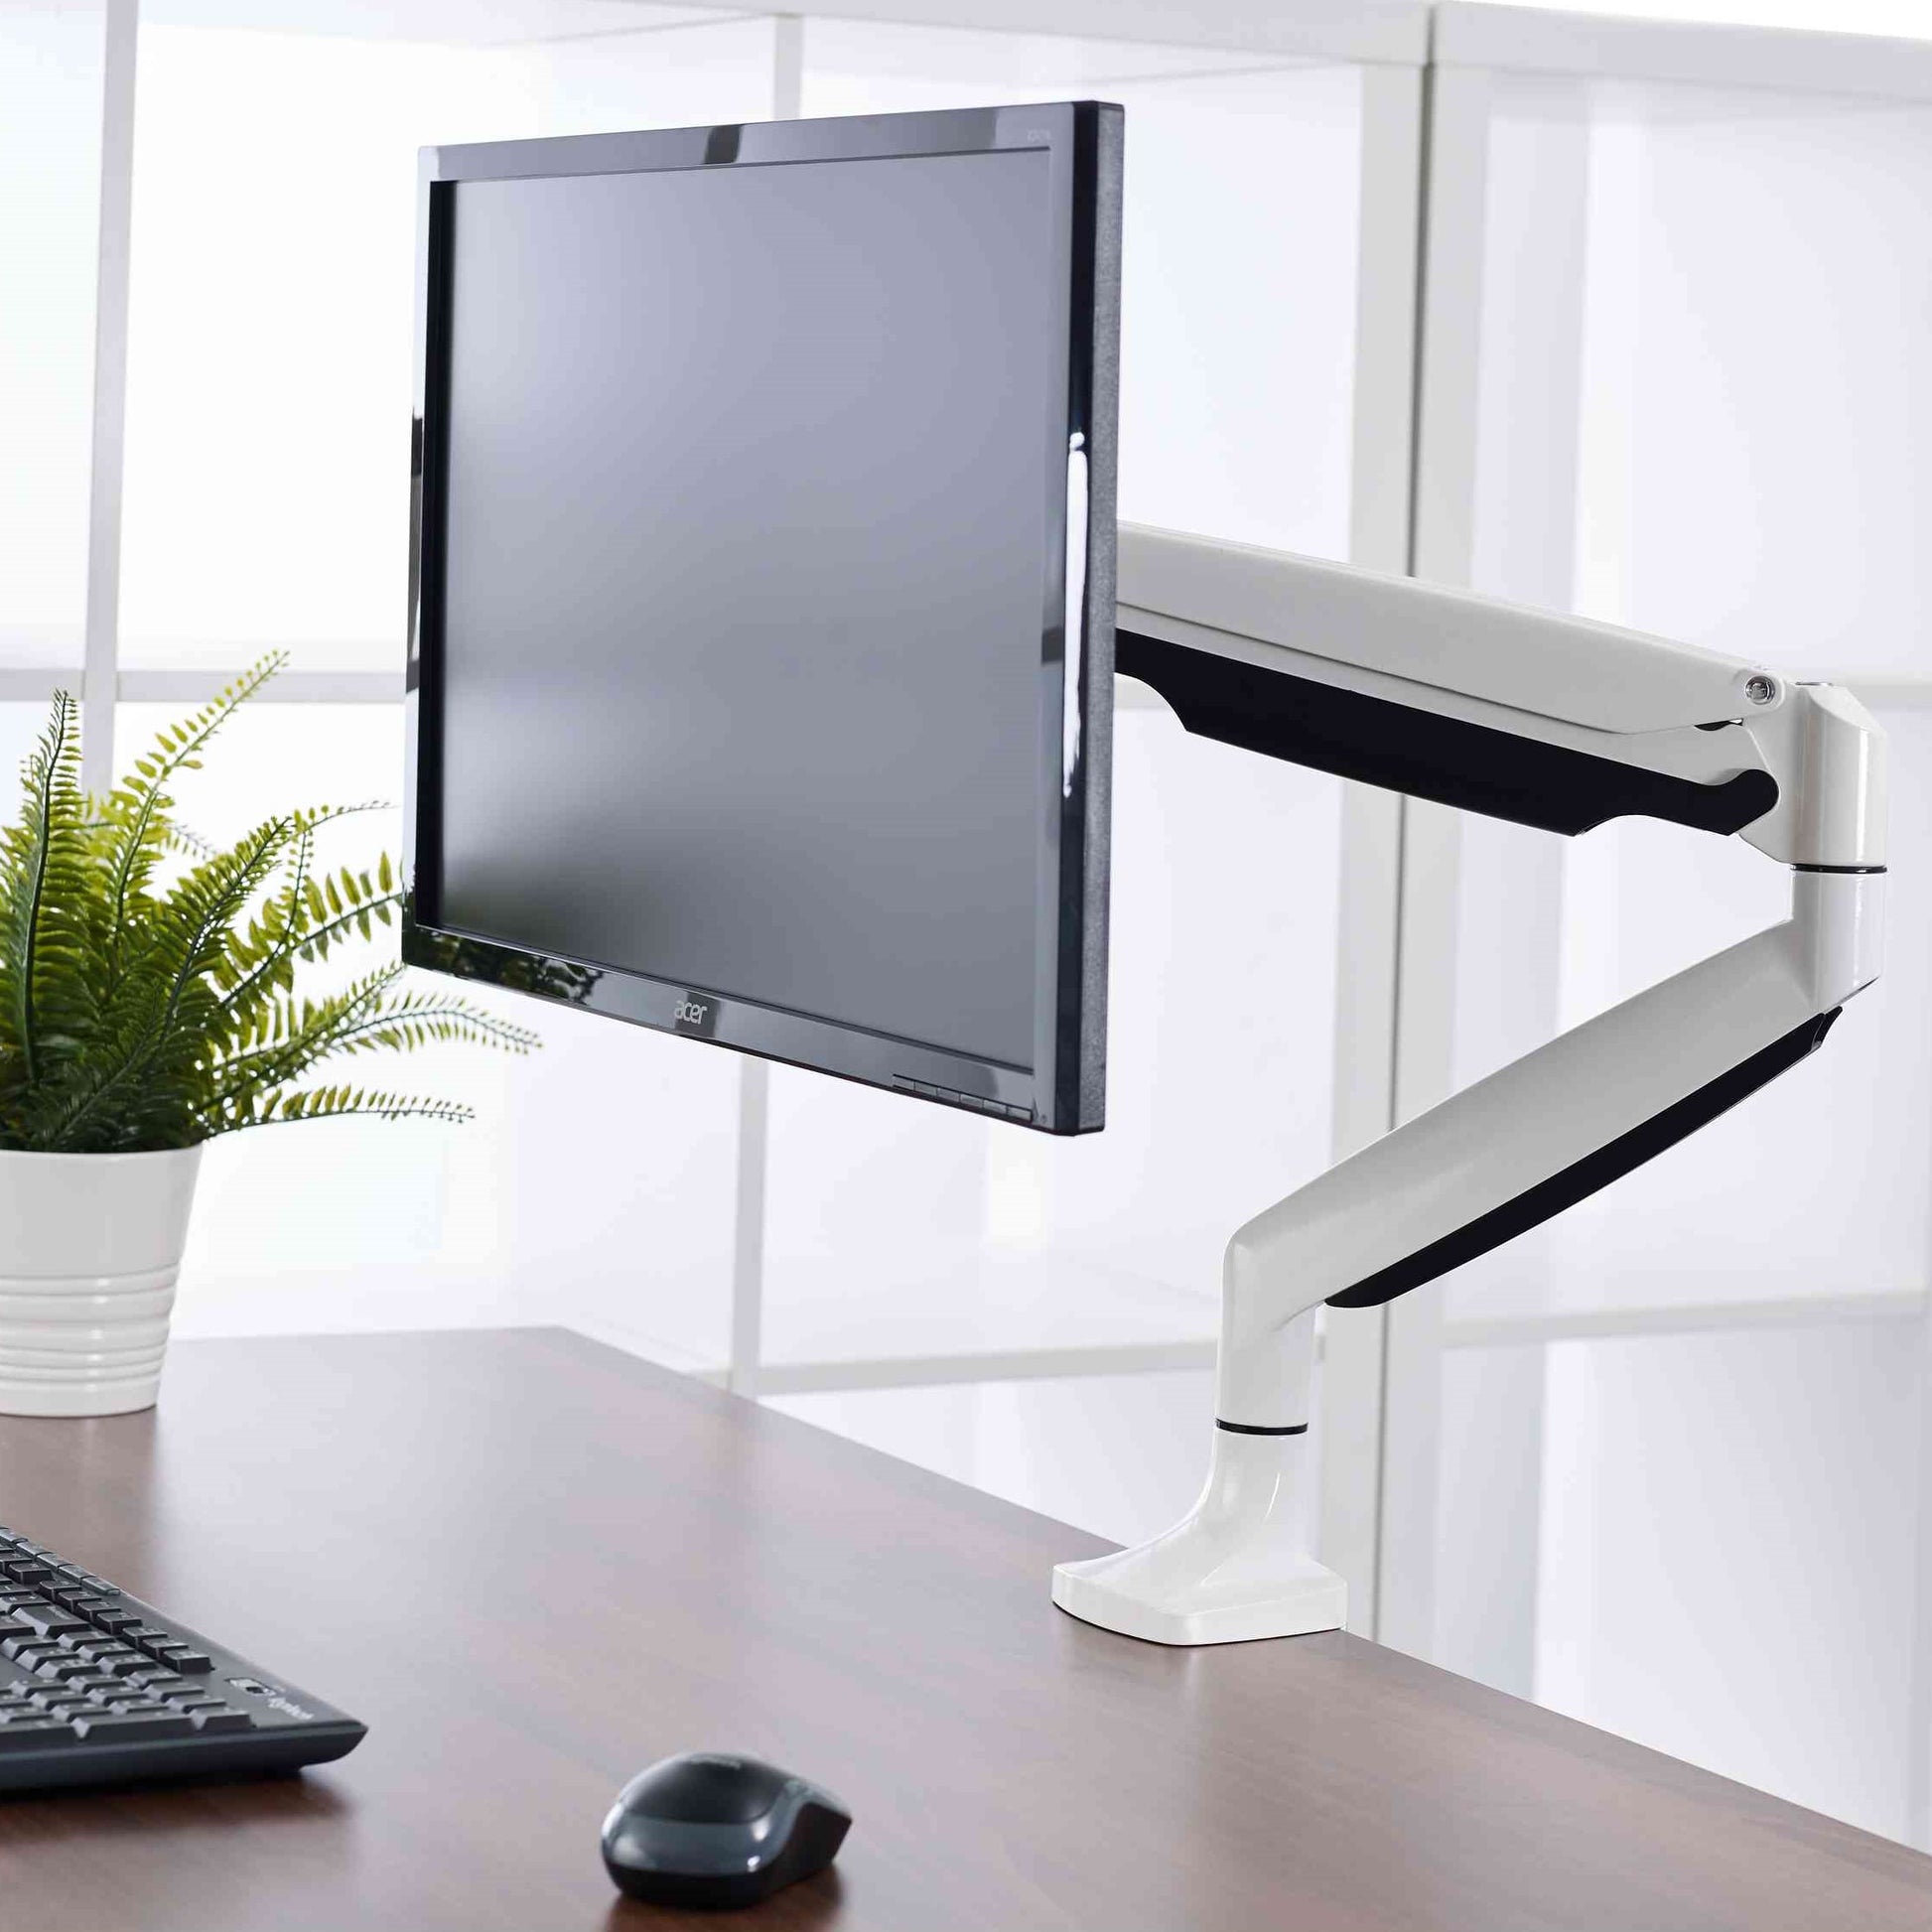 Visby Ergonomic Gas Assisted Single Monitor Arm on desk